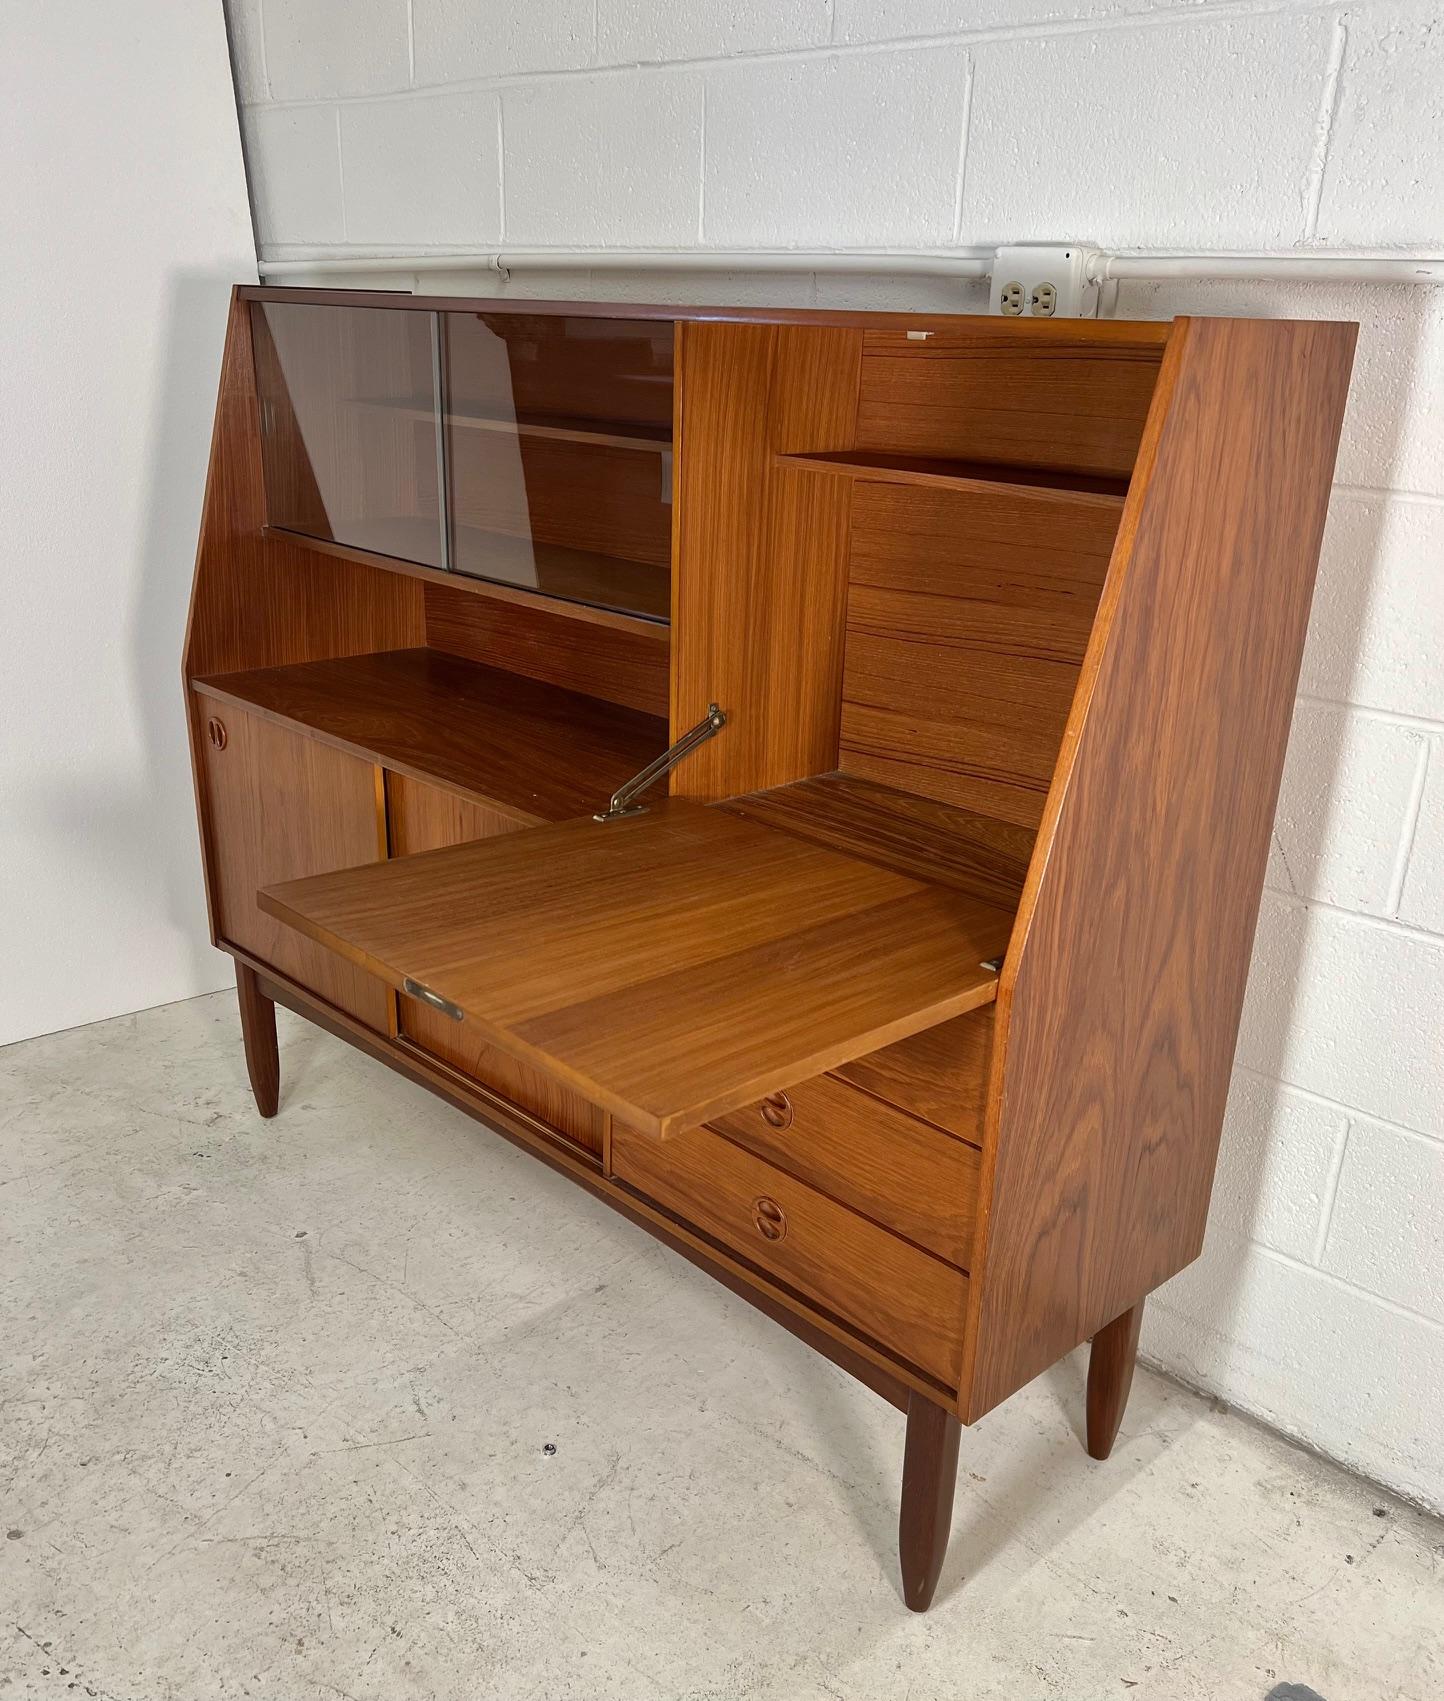 Mid century modern versatile teak highboard. Featuring a drop down cabinet that can be used as a small secretary desk or a bar.
Three drawers and a cabinet with sliding doors and fixed shelf at the bottom.

Condition: Very good condition. Minor